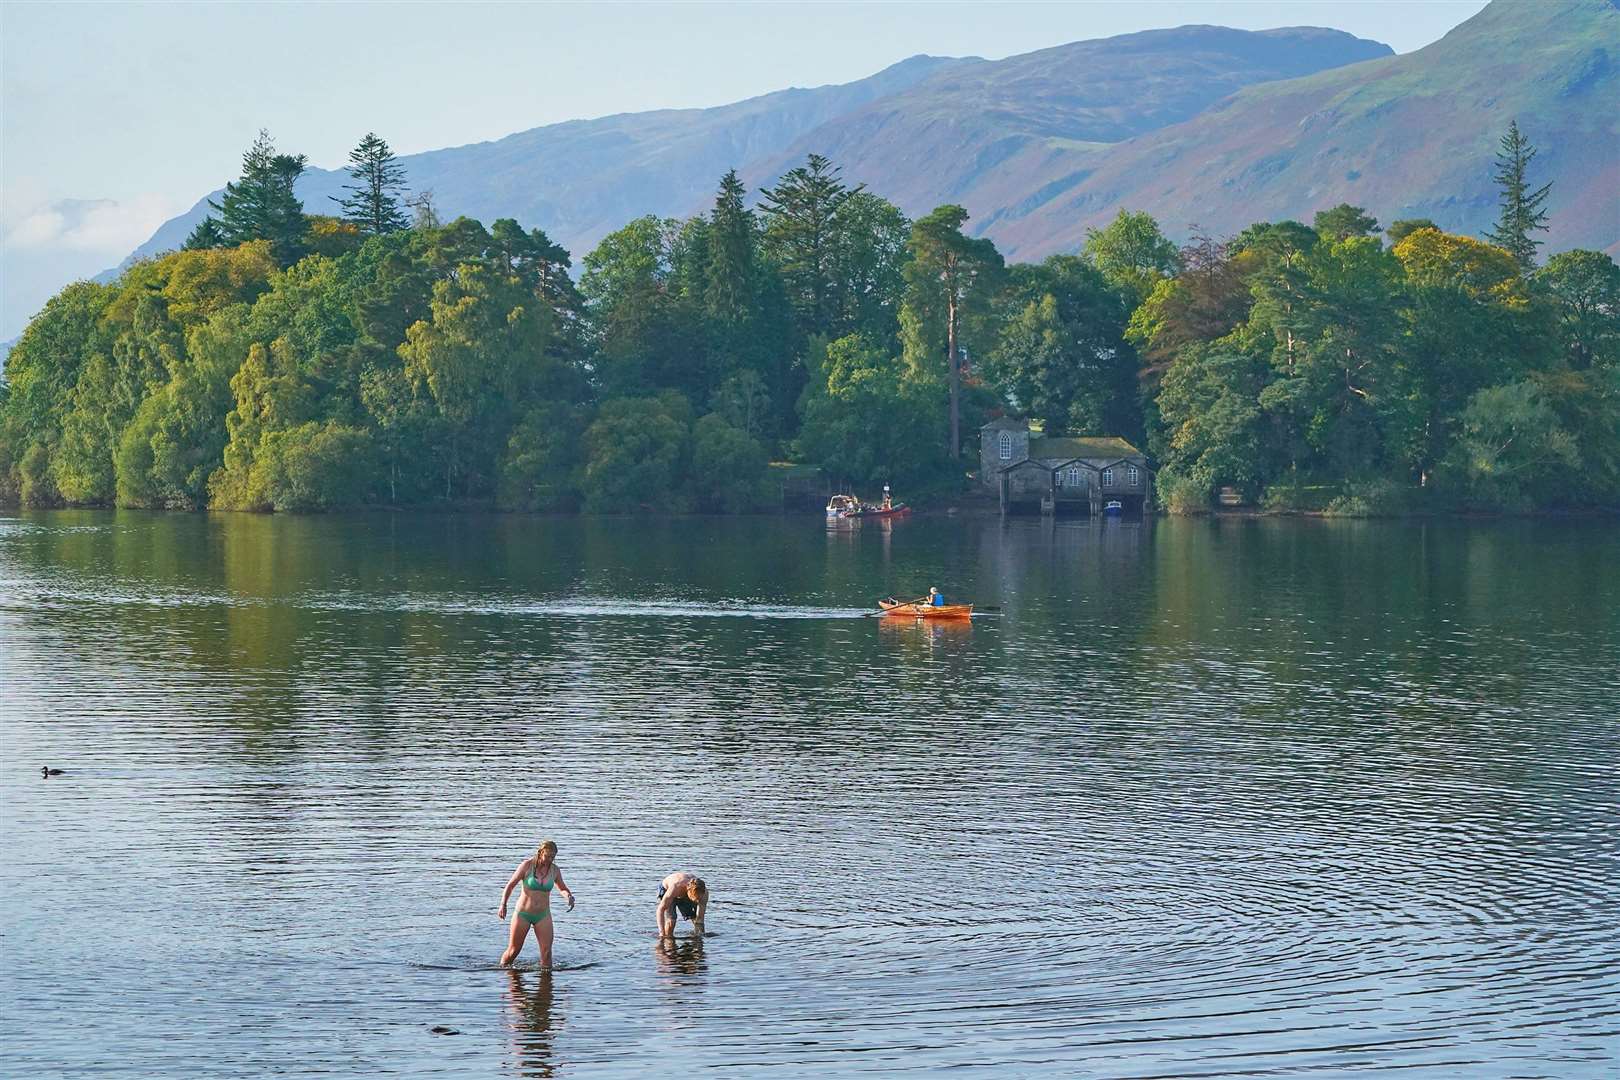 Rowers and swimmers on Derwentwater and Keswick in the Lake District on Monday (Owen Humphreys/PA)